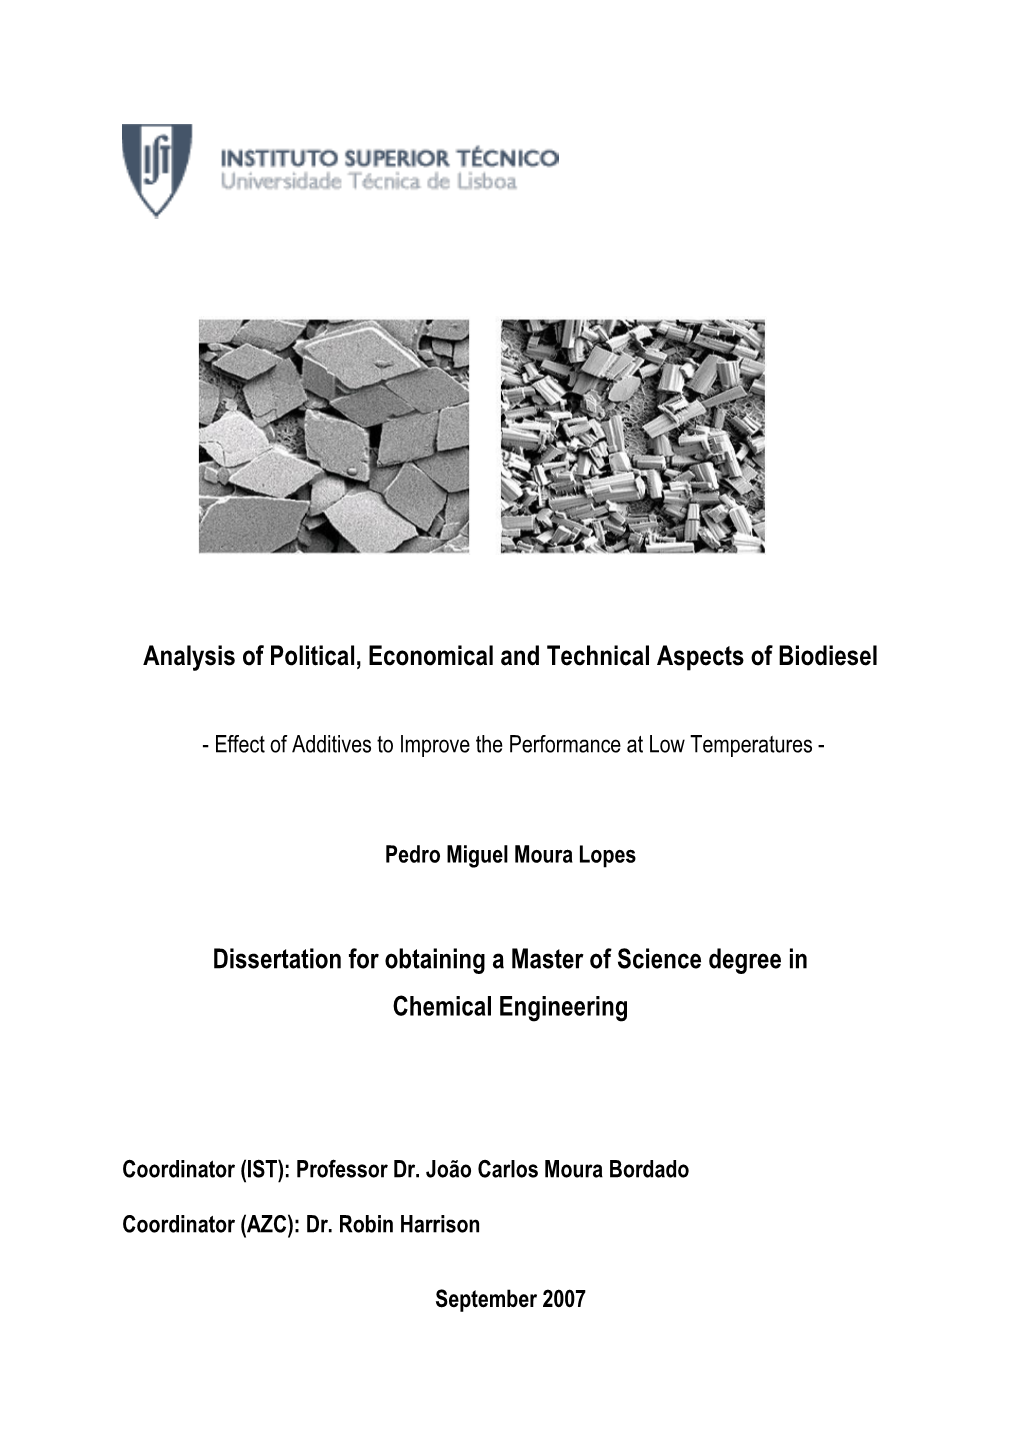 Analysis of Political, Economical and Technical Aspects of Biodiesel Dissertation for Obtaining a Master of Science Degree In